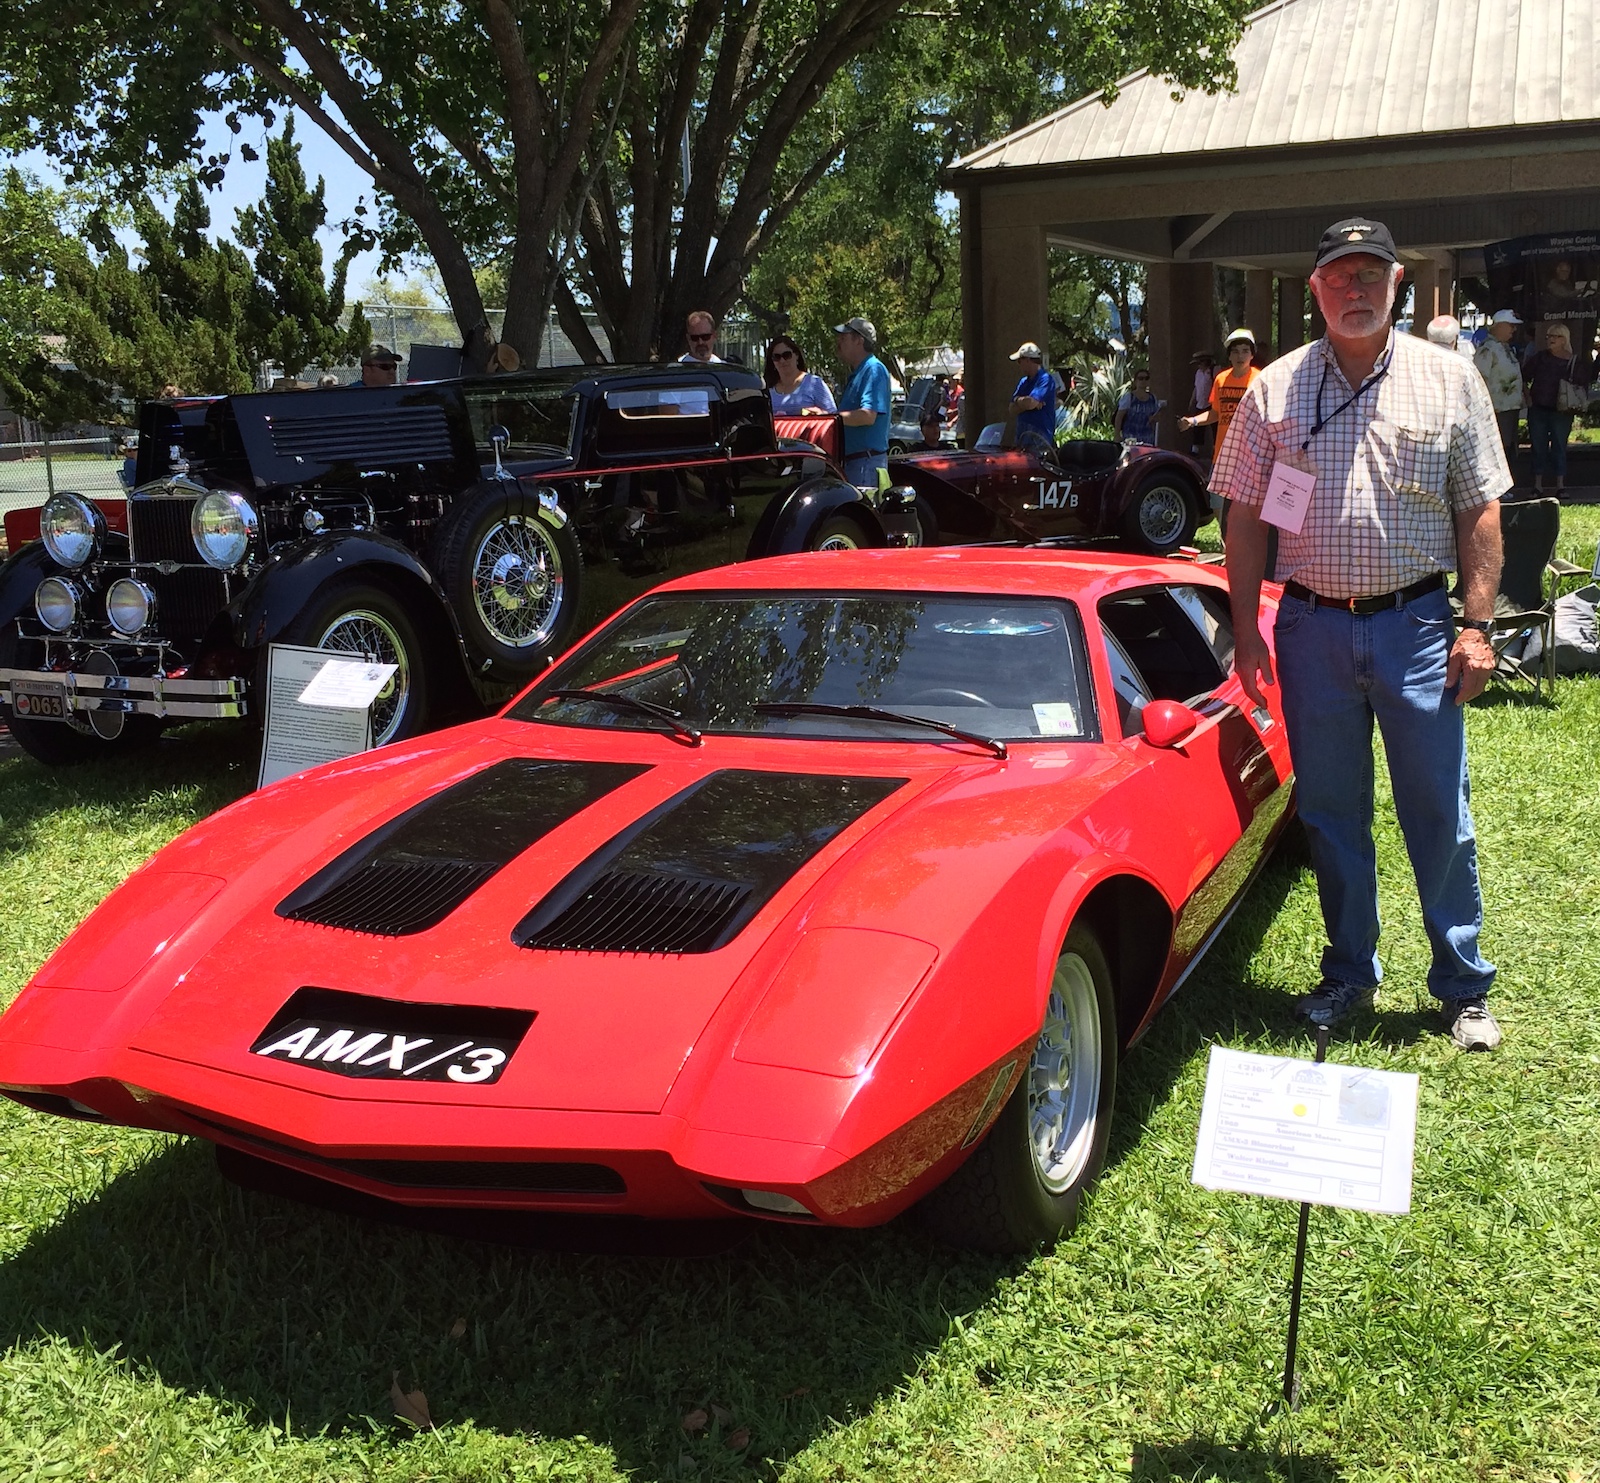 The AMX/3 By Bizzarrini Wins Its Class At Keels And Wheels